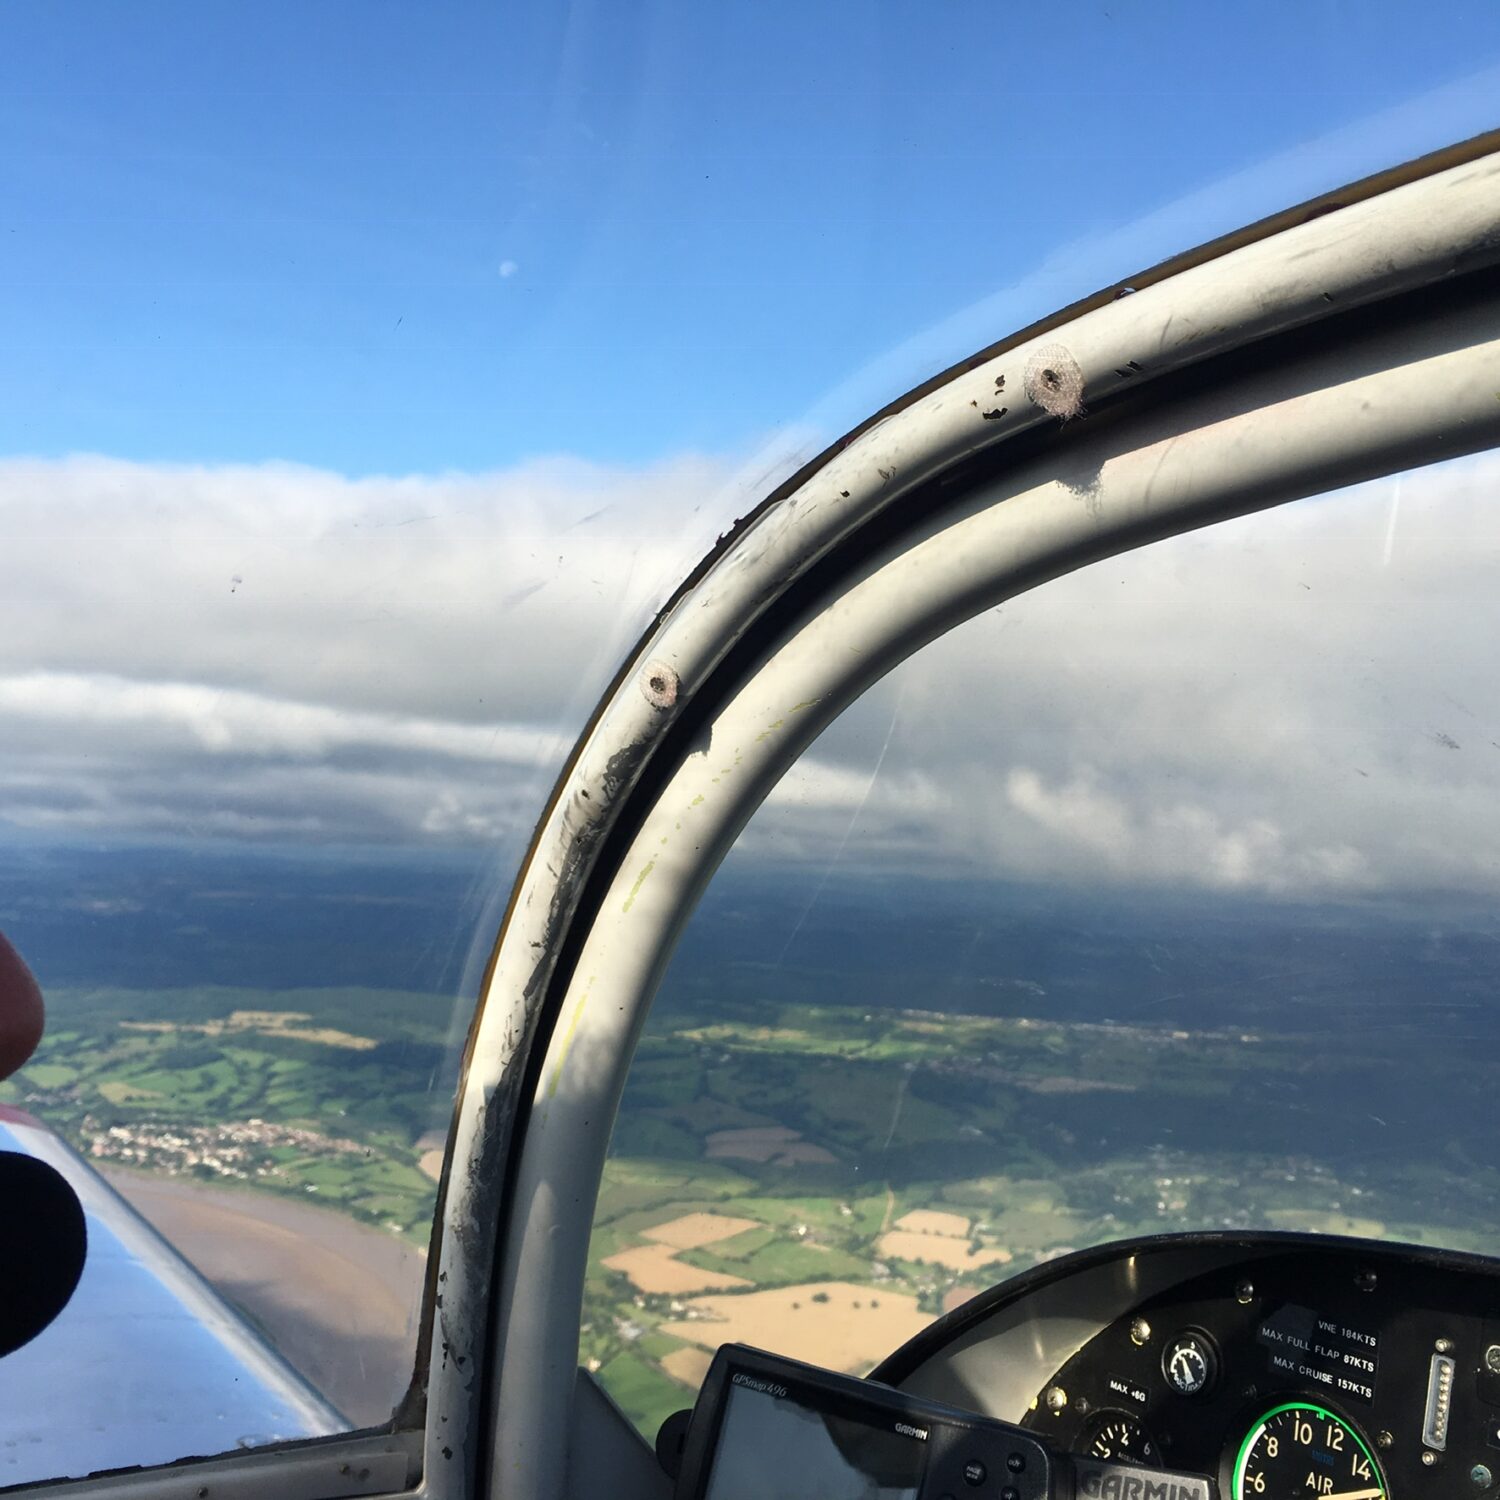 Pilot uses chart and GPS to navigate, finding waypoints on the ground